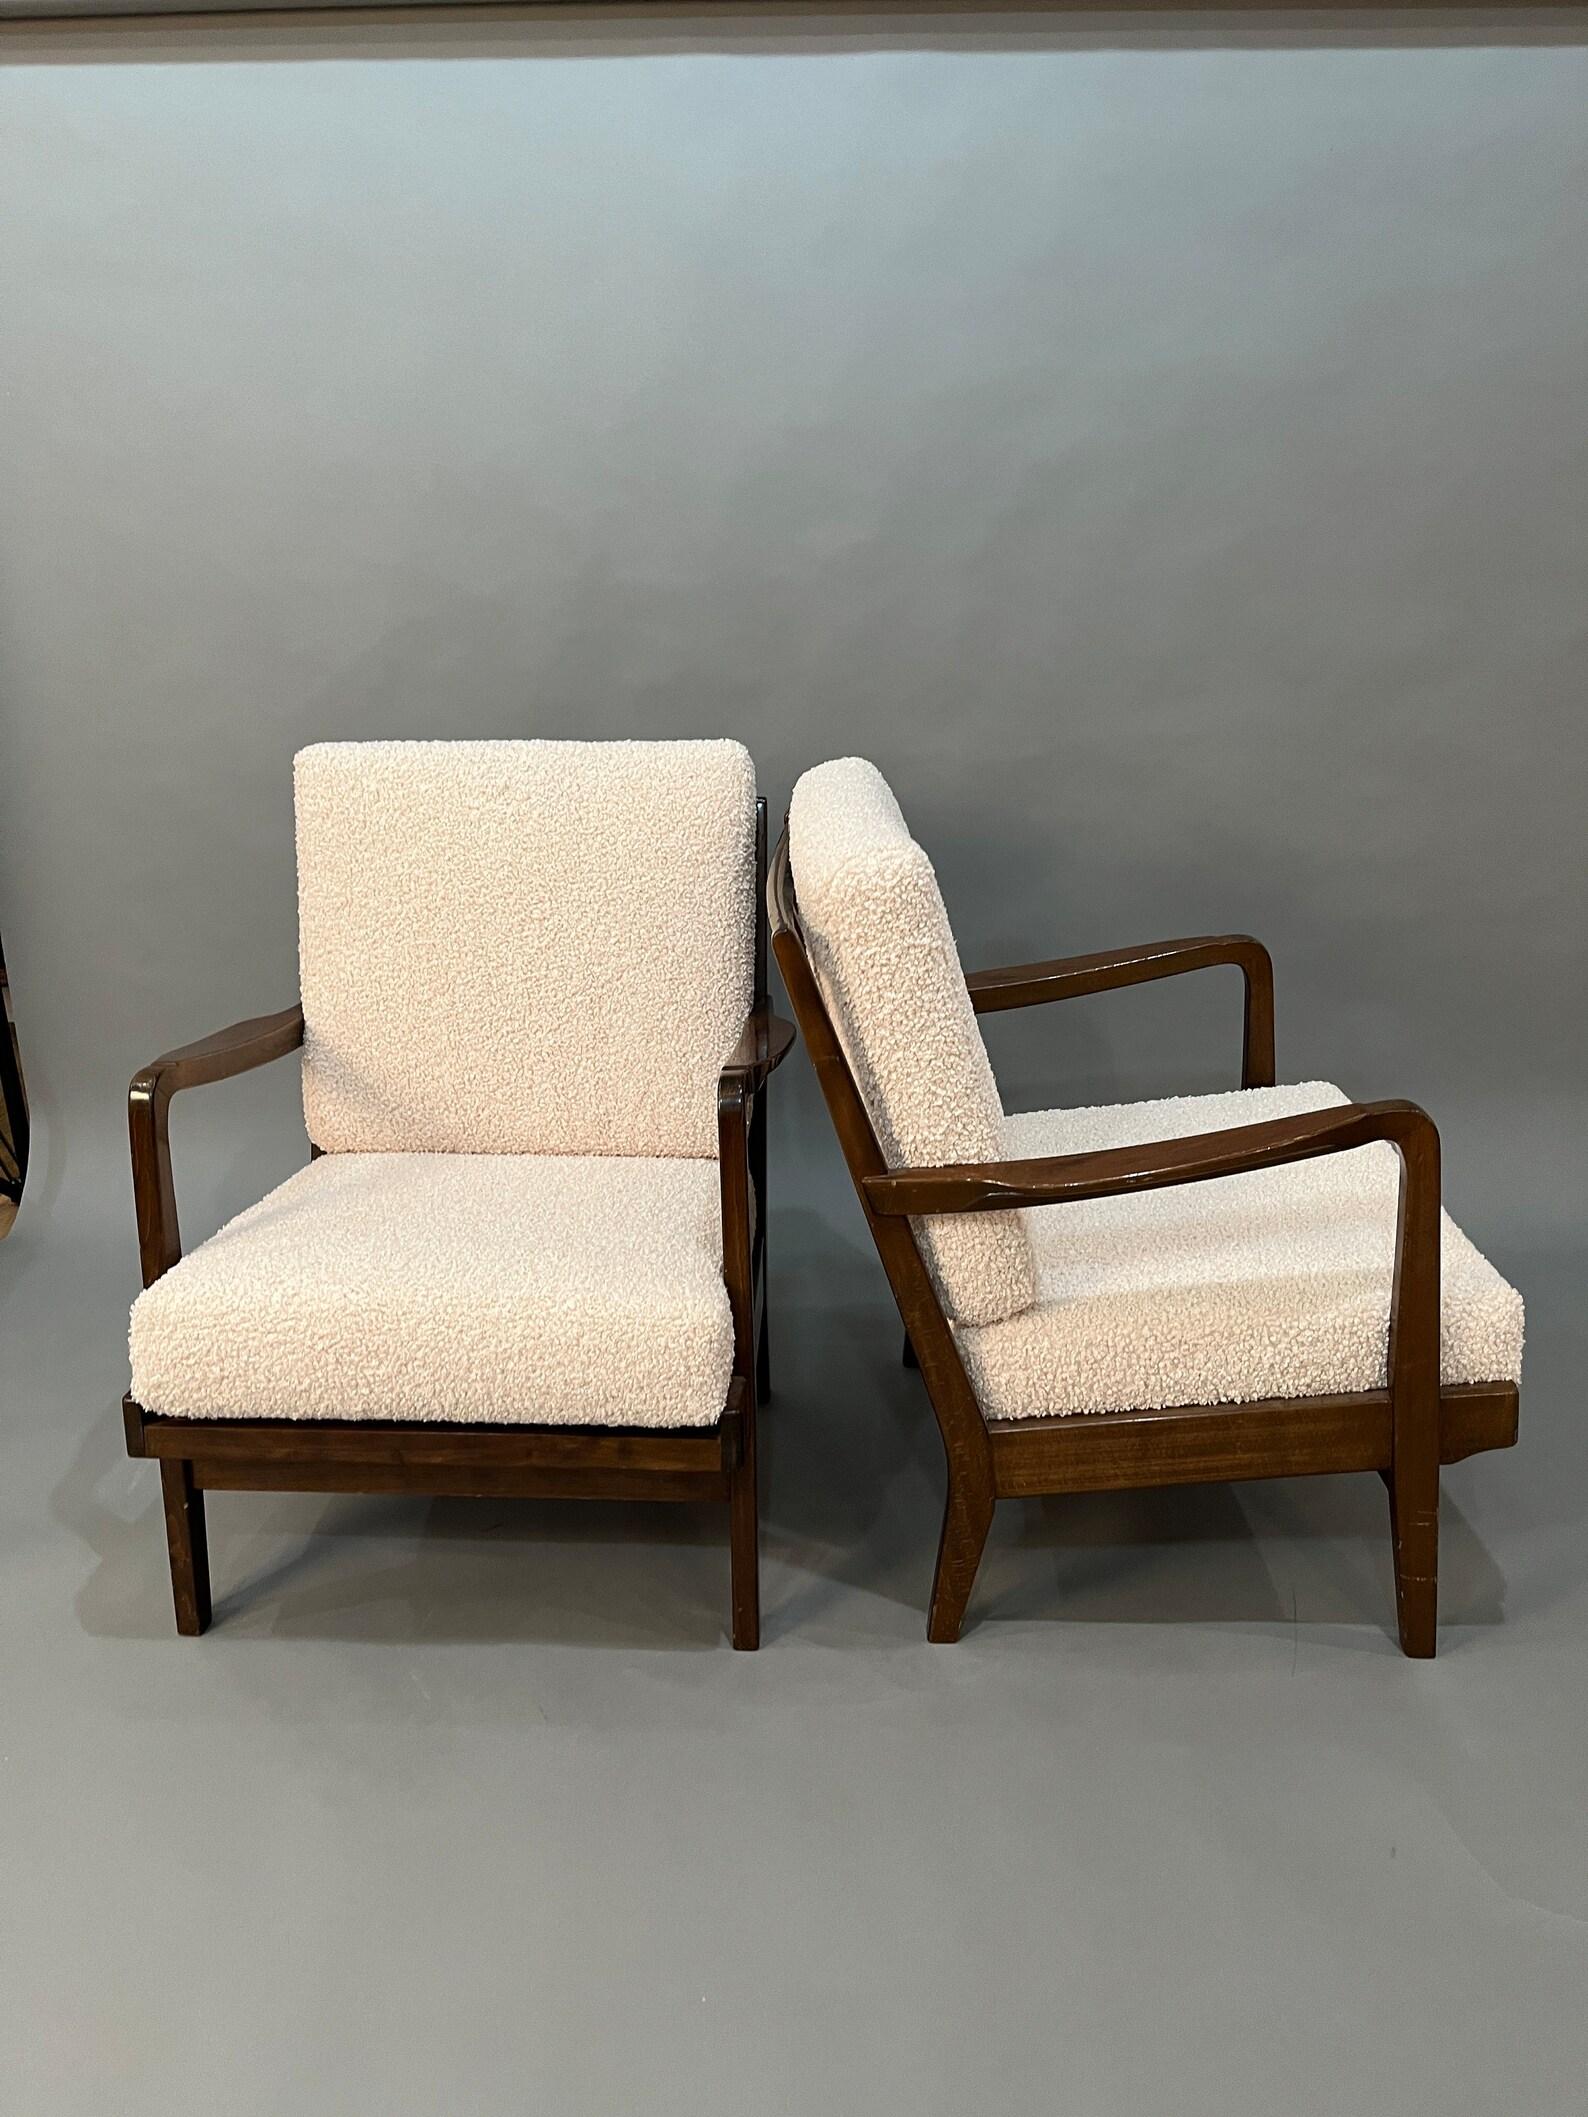 Discover our meticulously selected pair of exquisite Mid Century mahogany lounge chairs, thoughtfully curated to enhance your living space. Each chair is adorned with brand new Fuzzy Bouclee cream cushions and inner firm foam, Adding a touch of